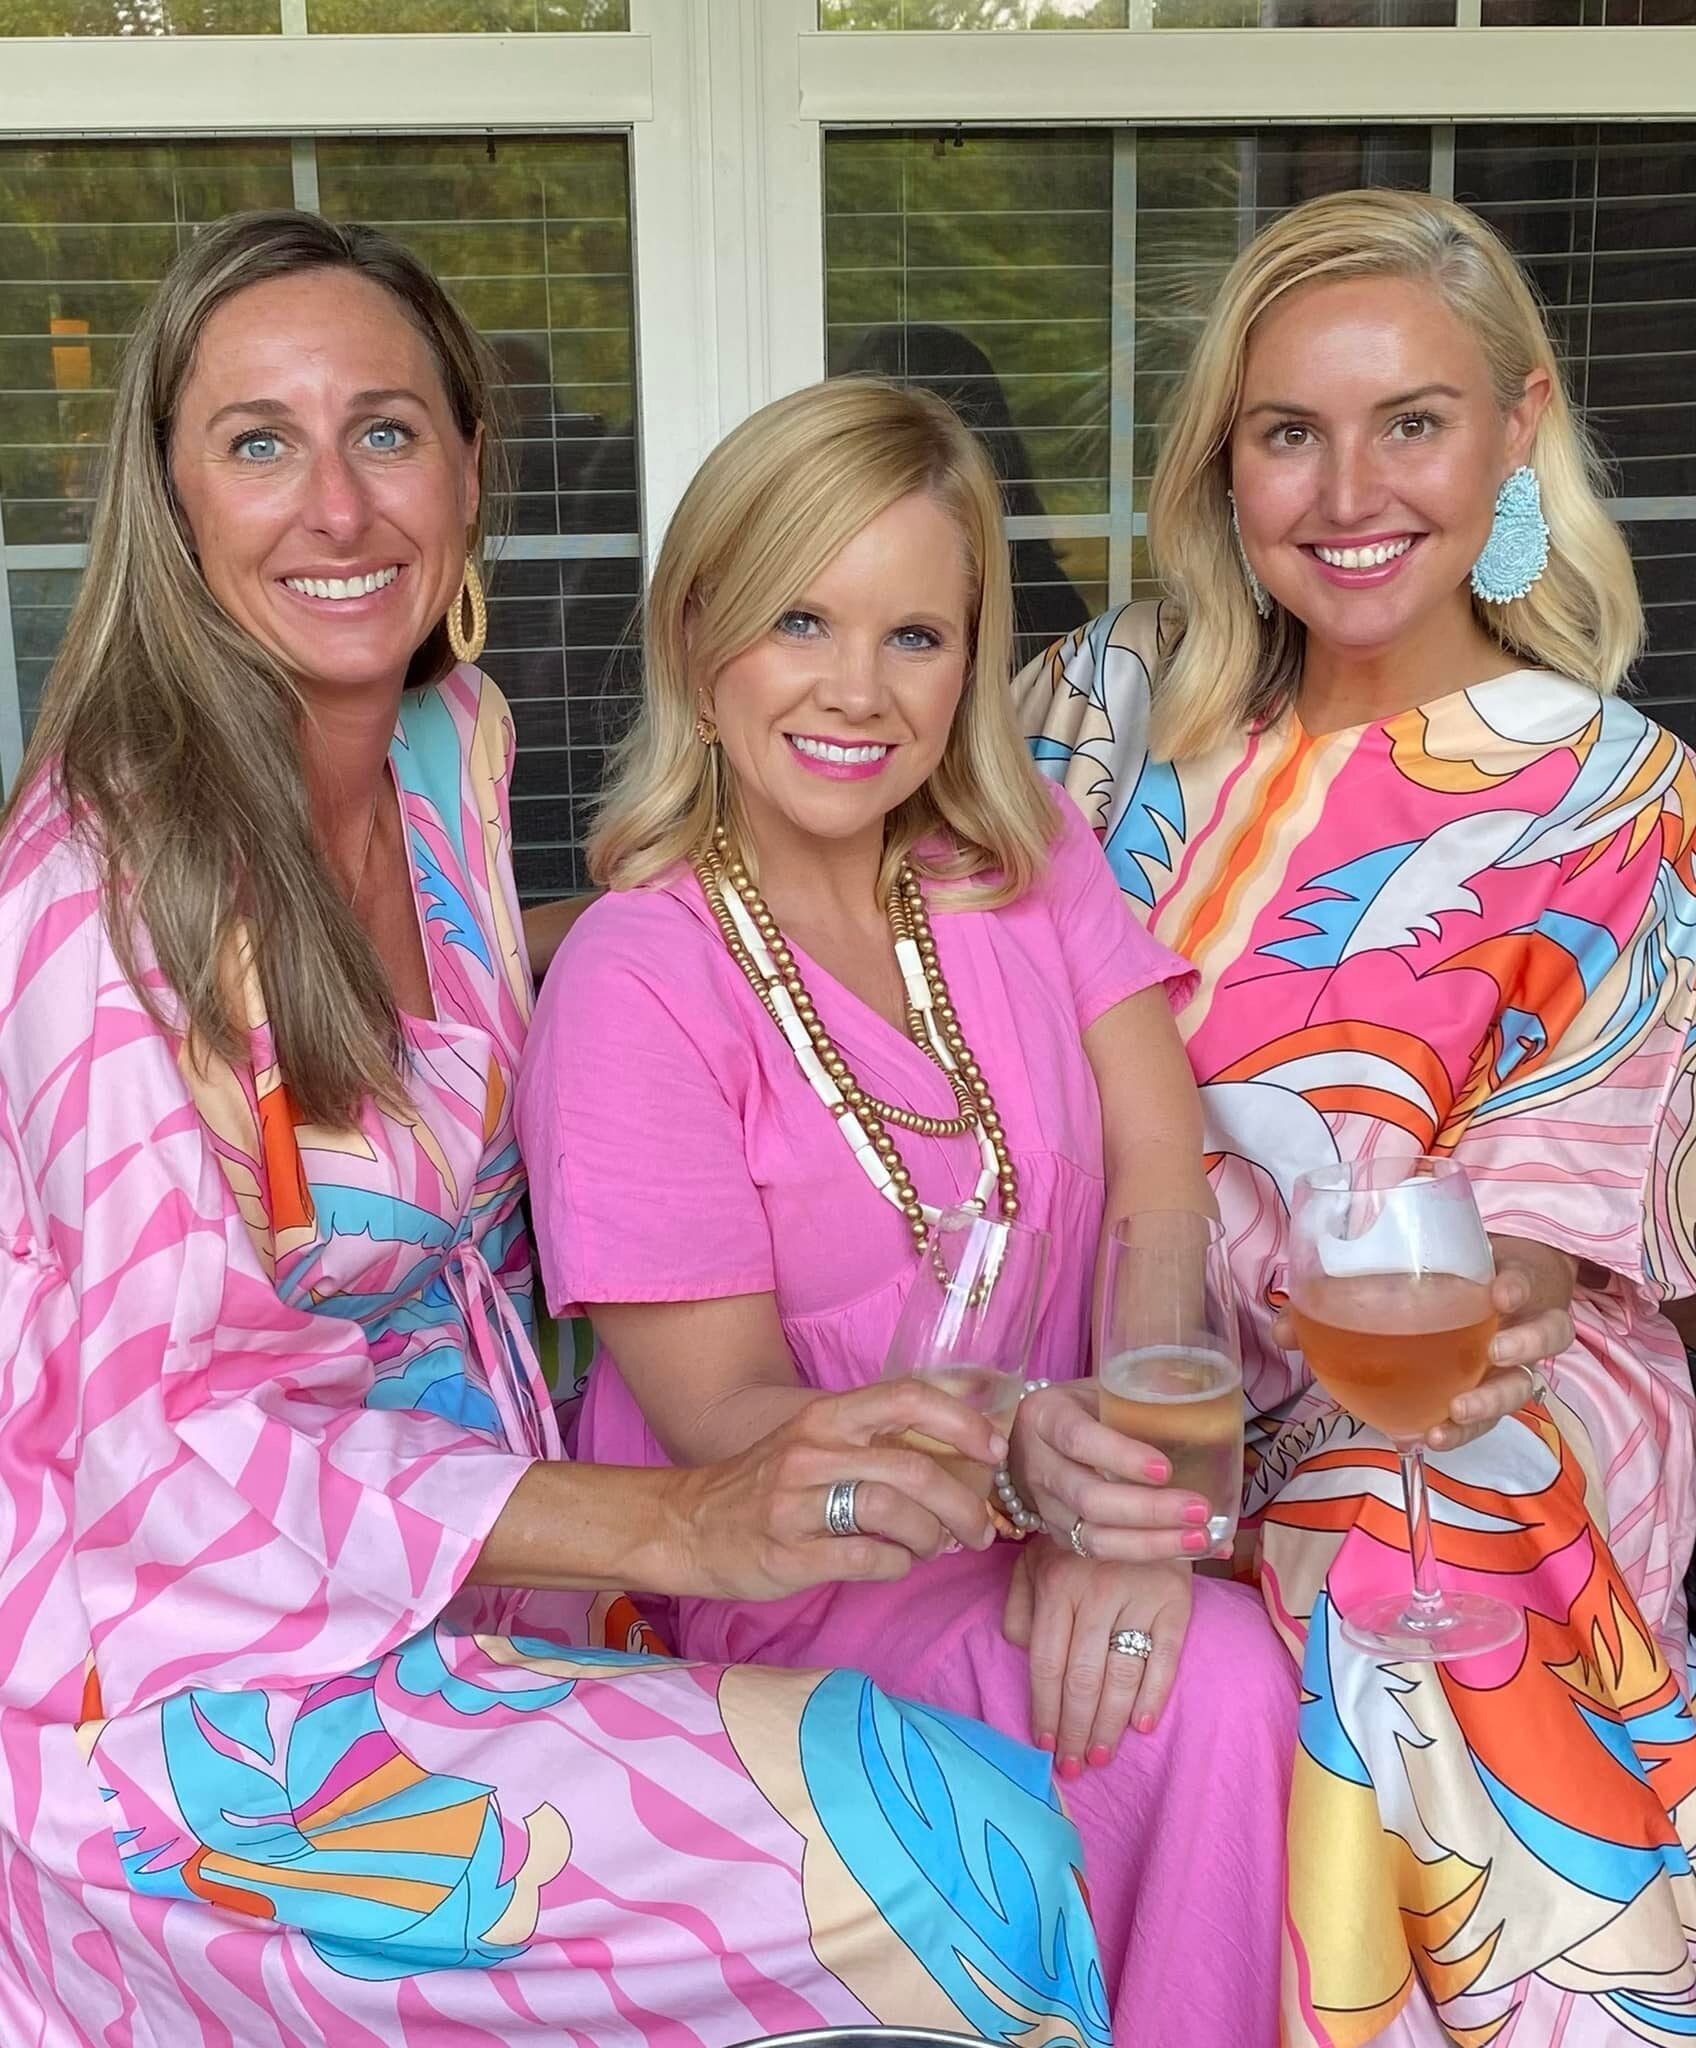 Who would have guessed back in the early 2000&rsquo;s that one day we&rsquo;d be sitting on the front porch sipping cocktails in our mumu&rsquo;s 😜